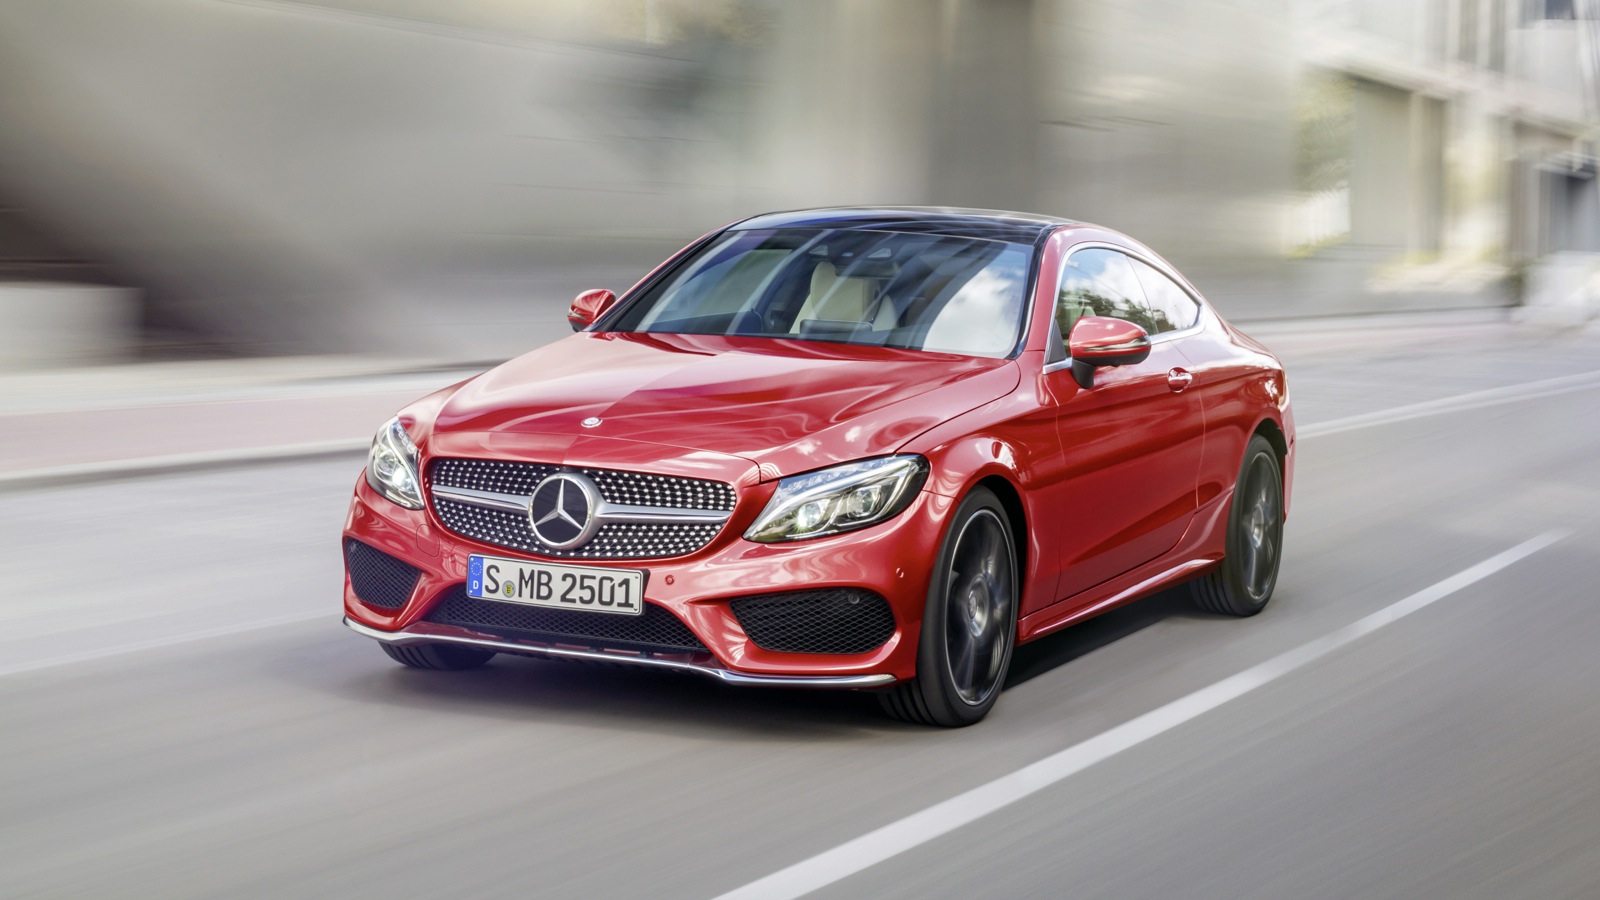 2016 Mercedes Benz C Class Coupe revealed Photos 1 of 36 